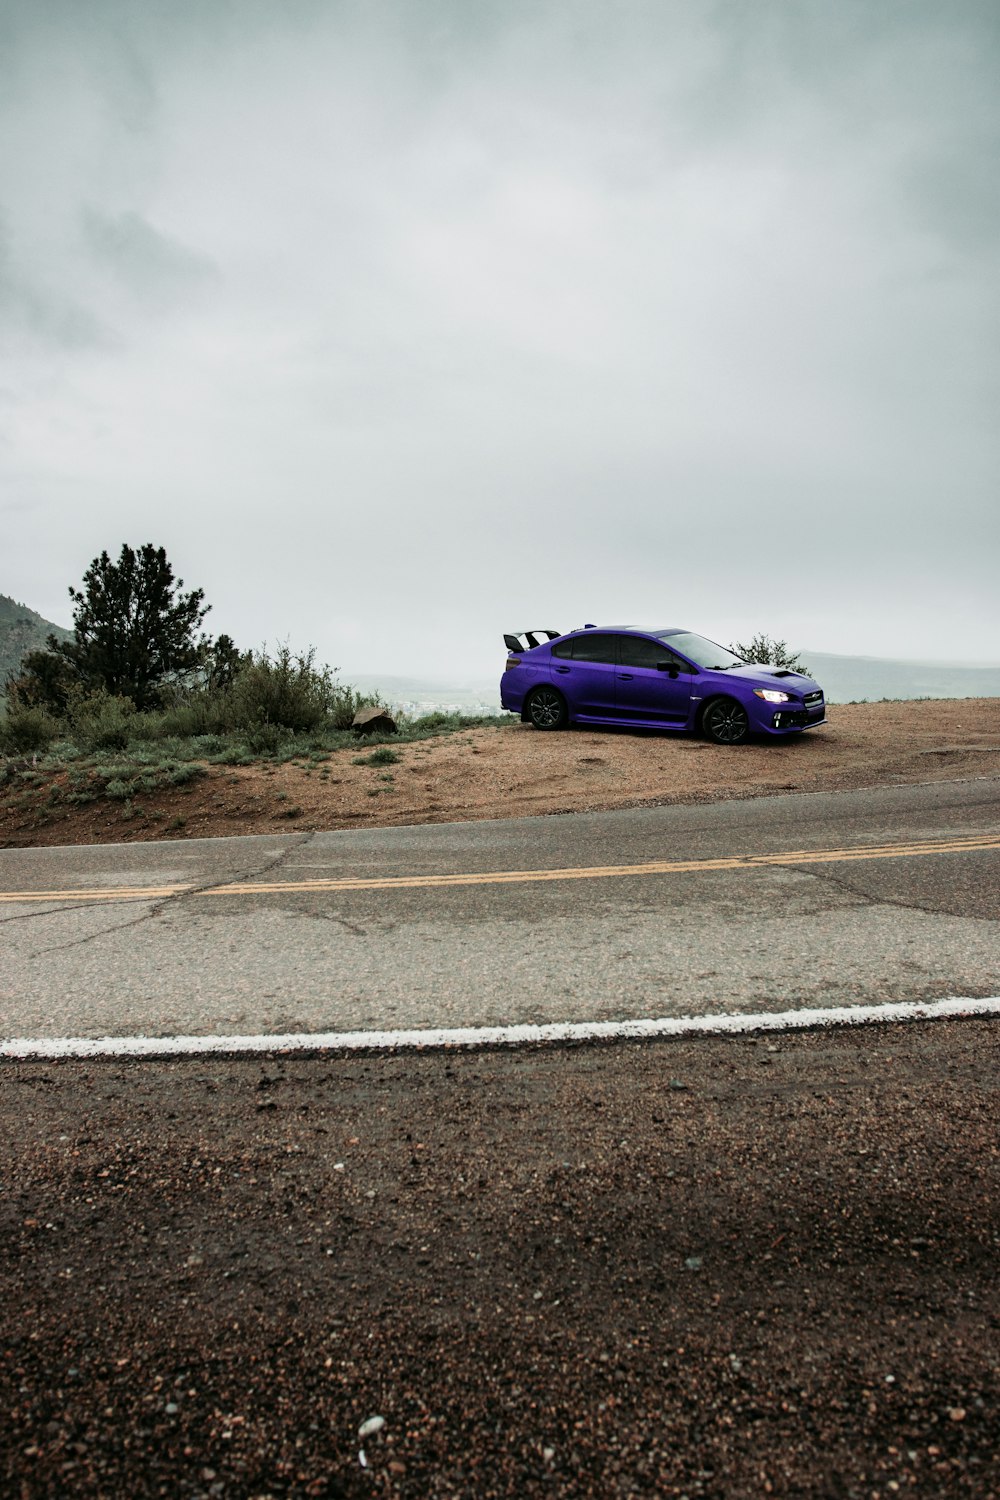 purple coupe on gray asphalt road under gray cloudy sky during daytime